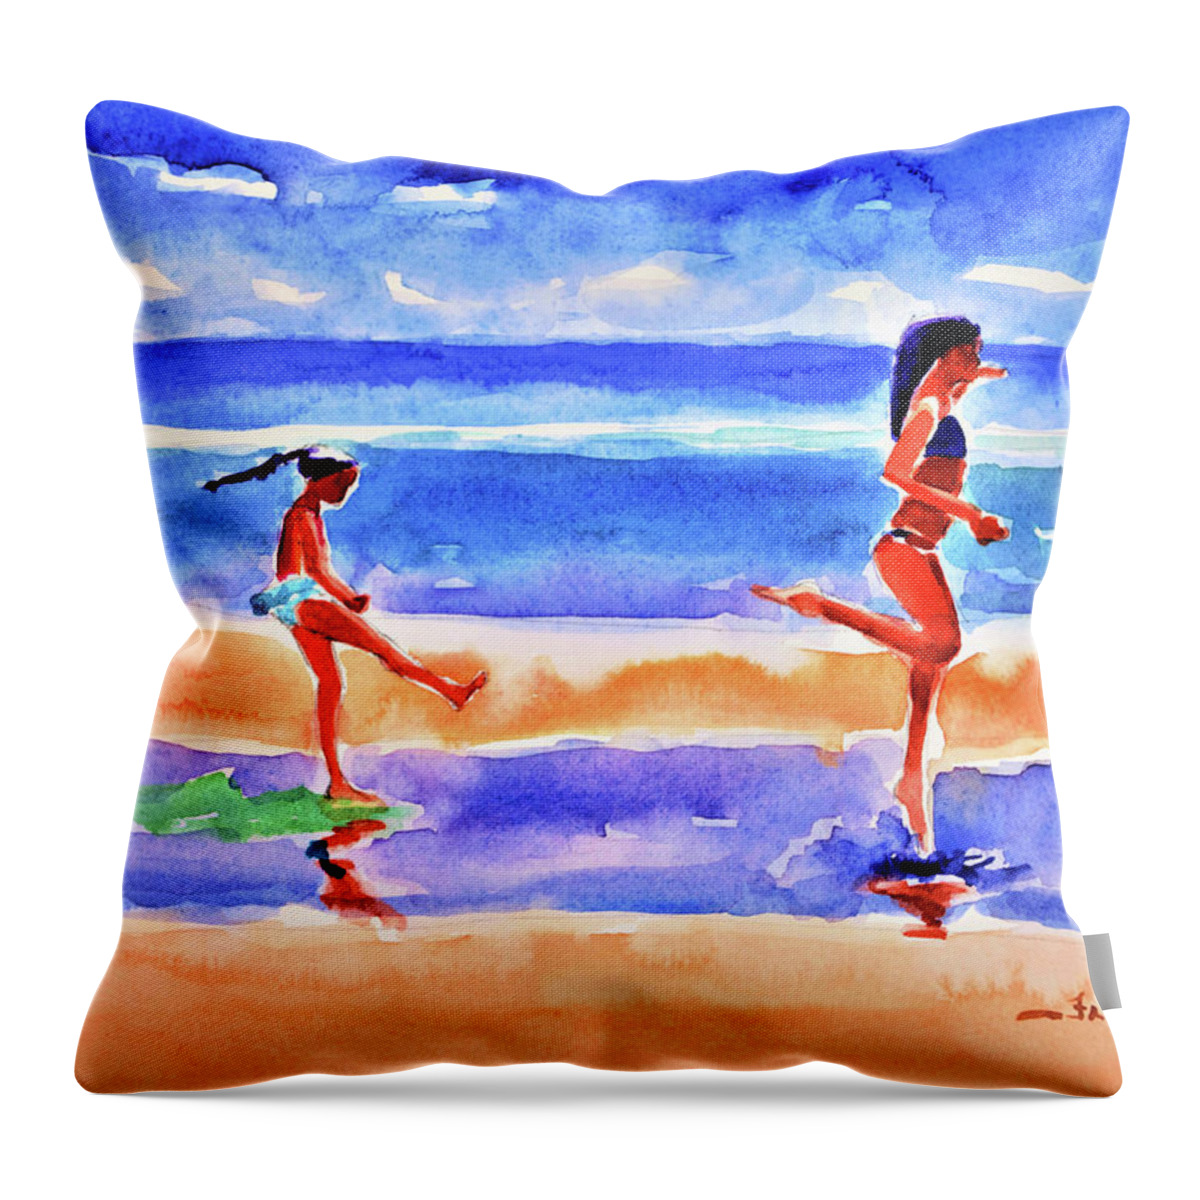 Original Throw Pillow featuring the painting Dancing in the tide pool 2018 by Julianne Felton